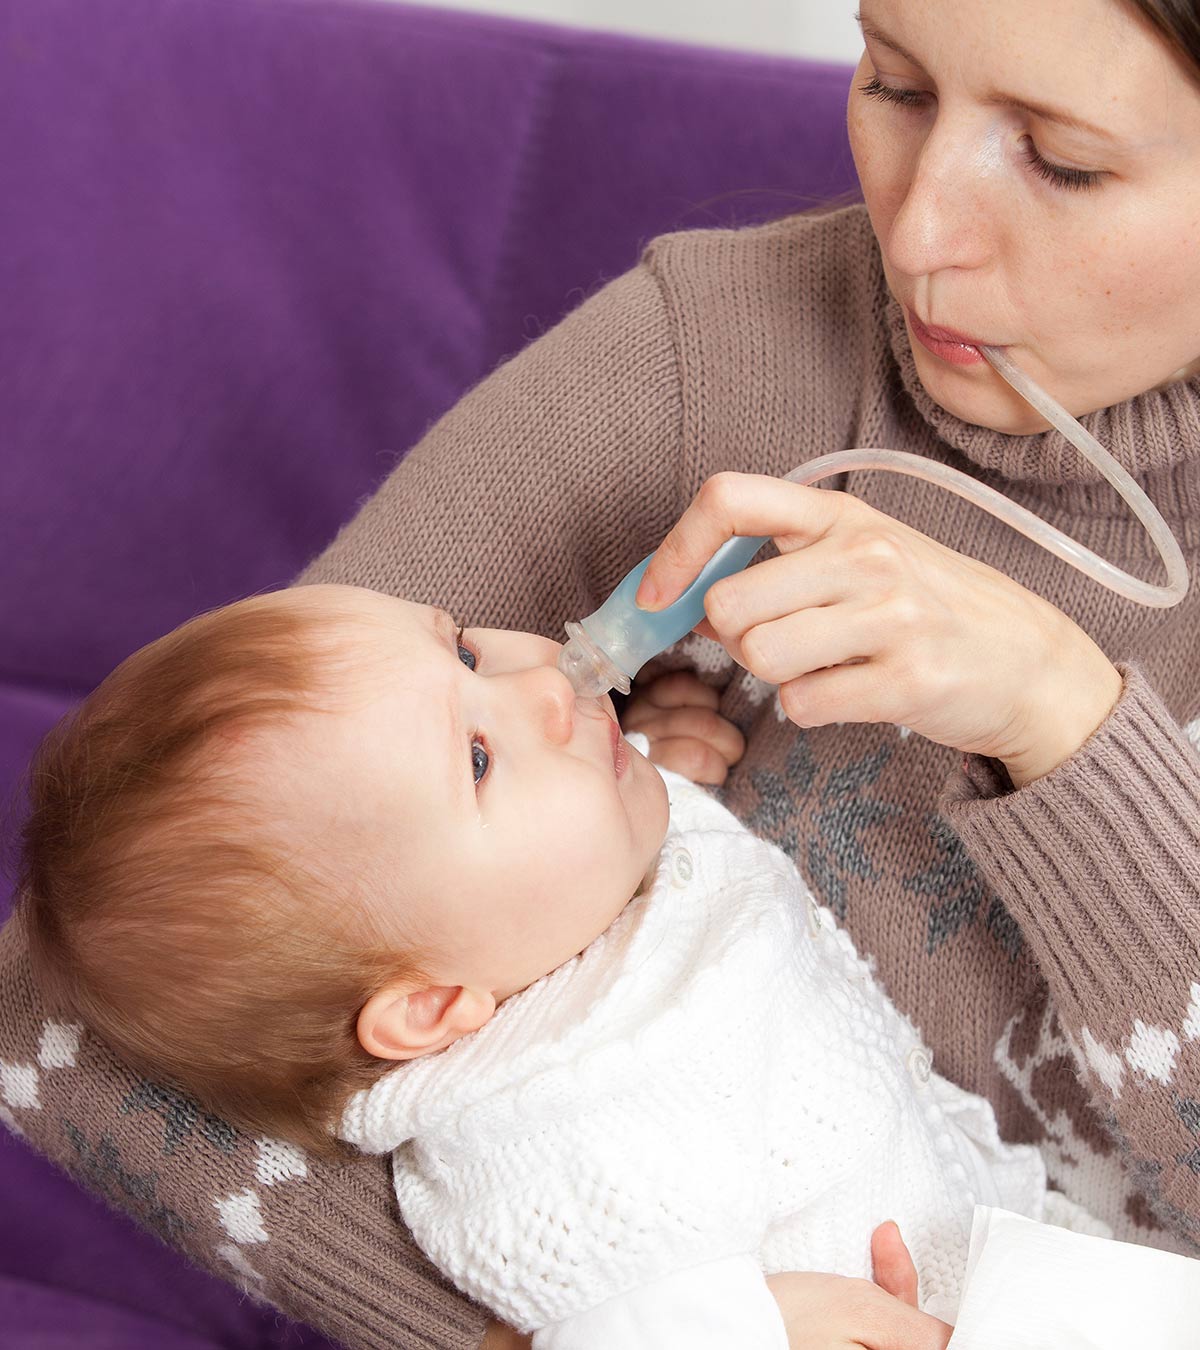 Baby Nasal Aspirator for Congestion Relief